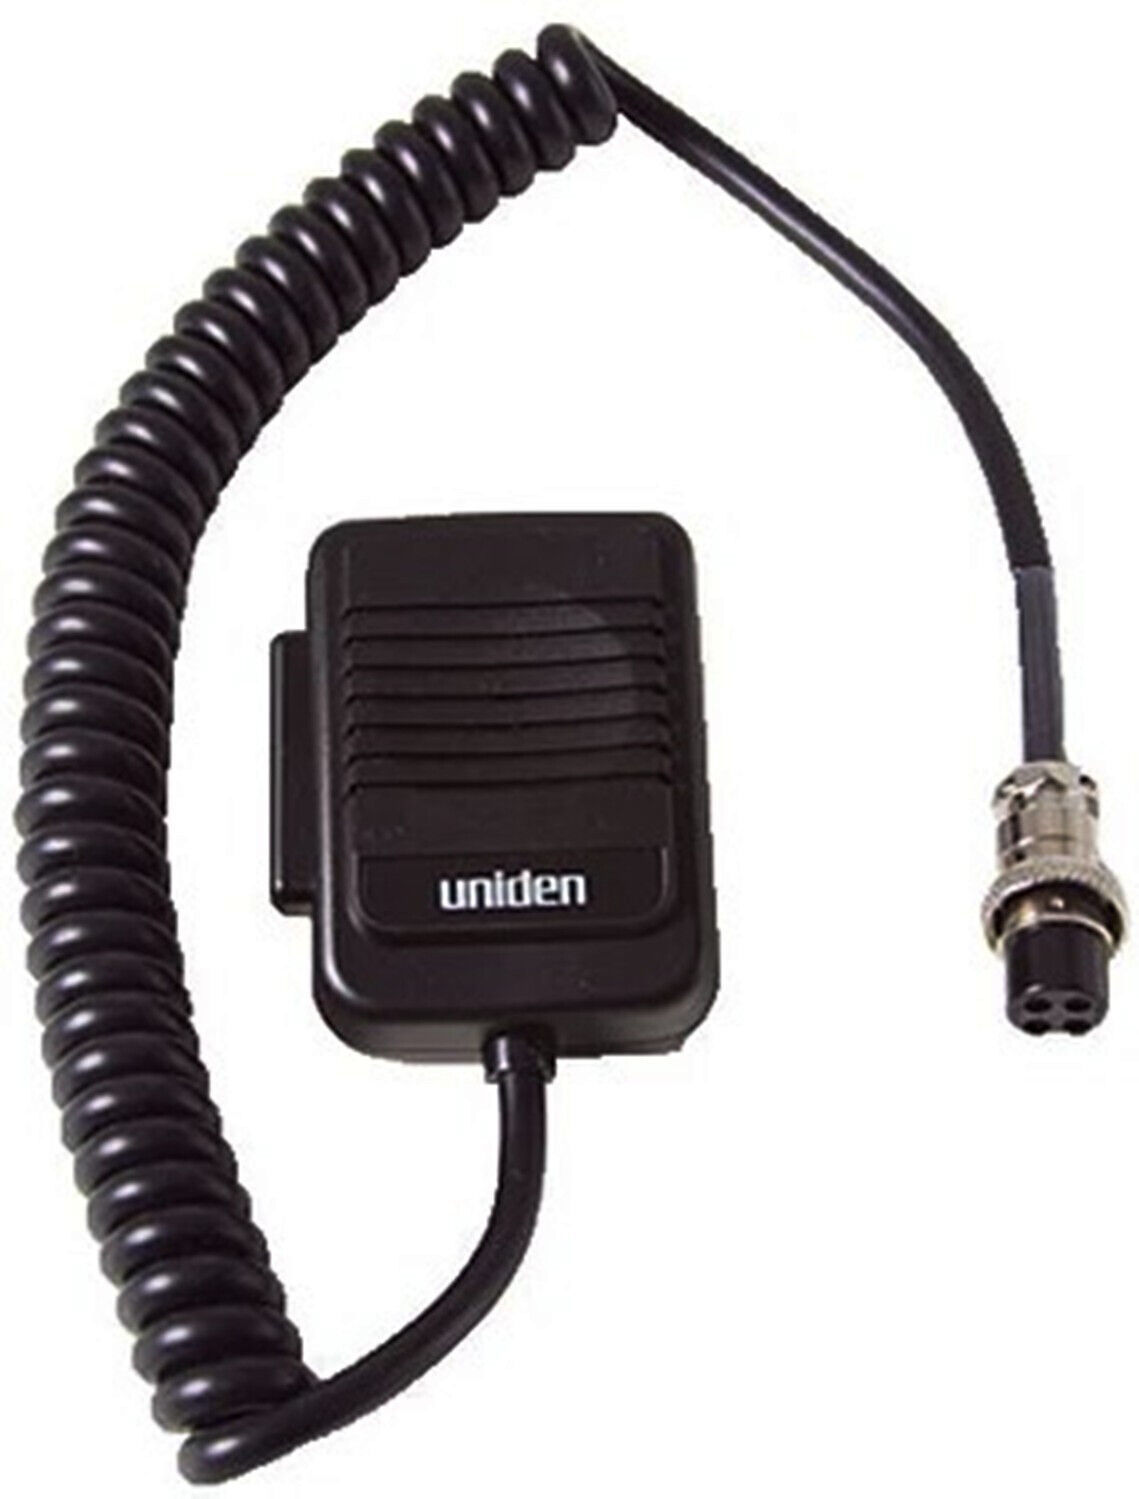 Uniden BMKG0633001 Replacement CB Microphone, 4-pin Microphone Connector - $25.00